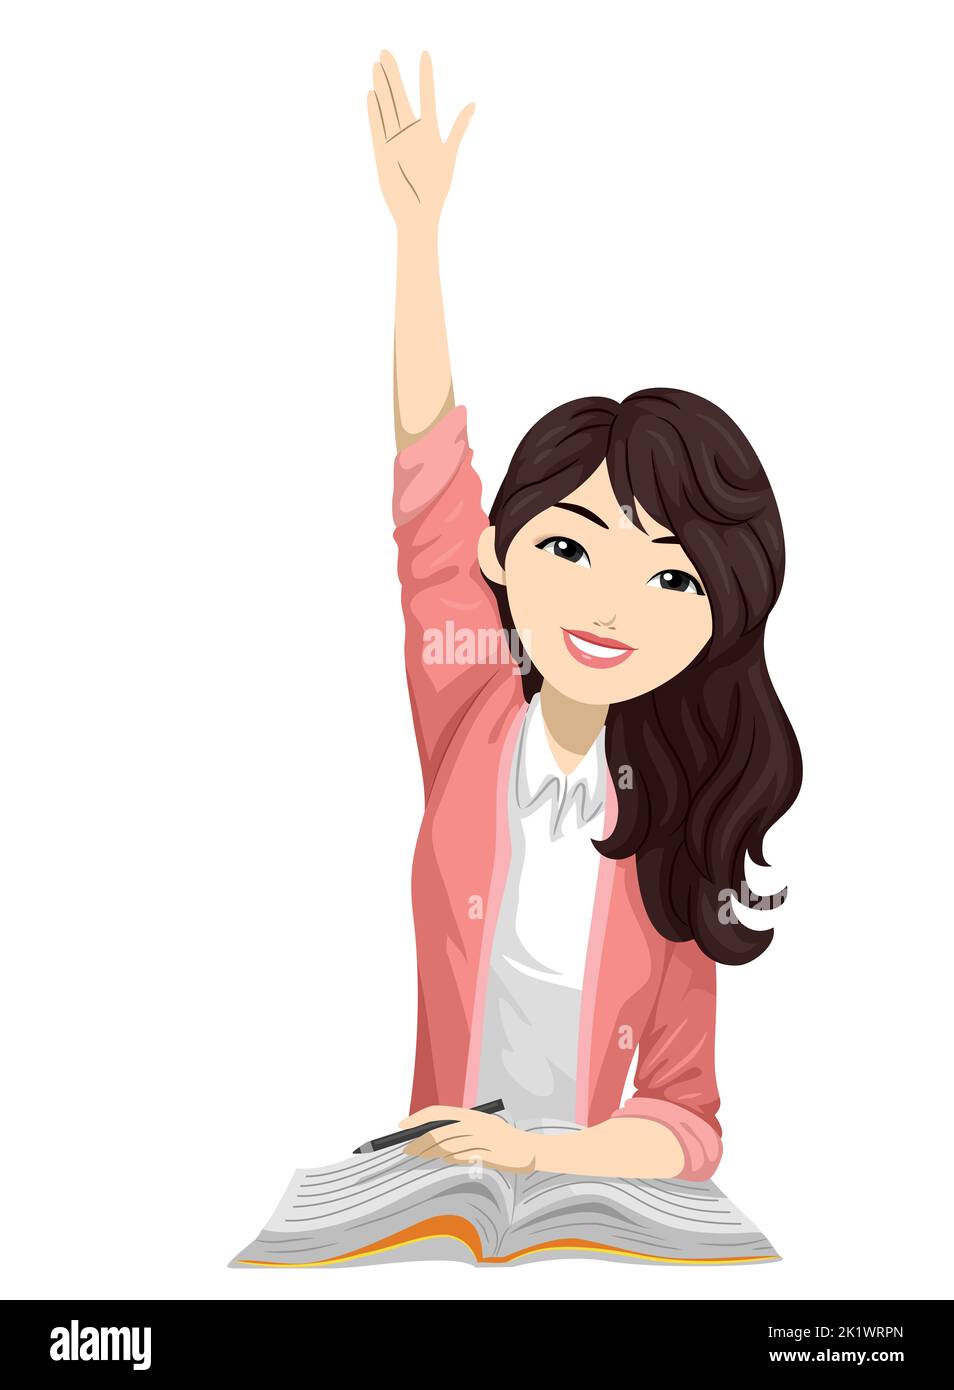 Illustration of Asian Teen Girl Student with a Book, Holding a Pen and Raising Her Hand in Class Stock Photo